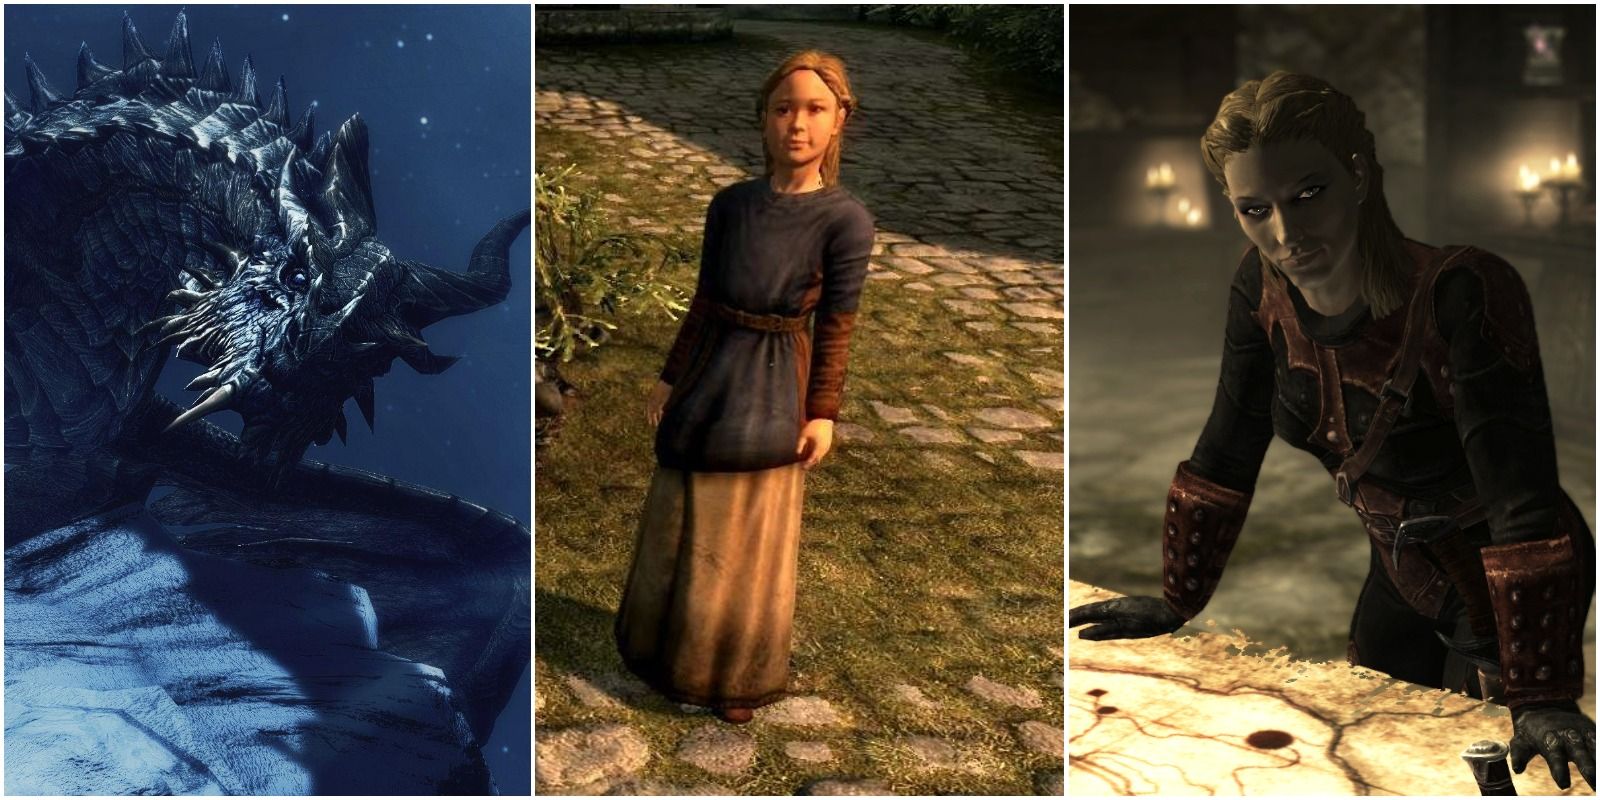 Paarthunax, a child, and Astrid in Skyrim